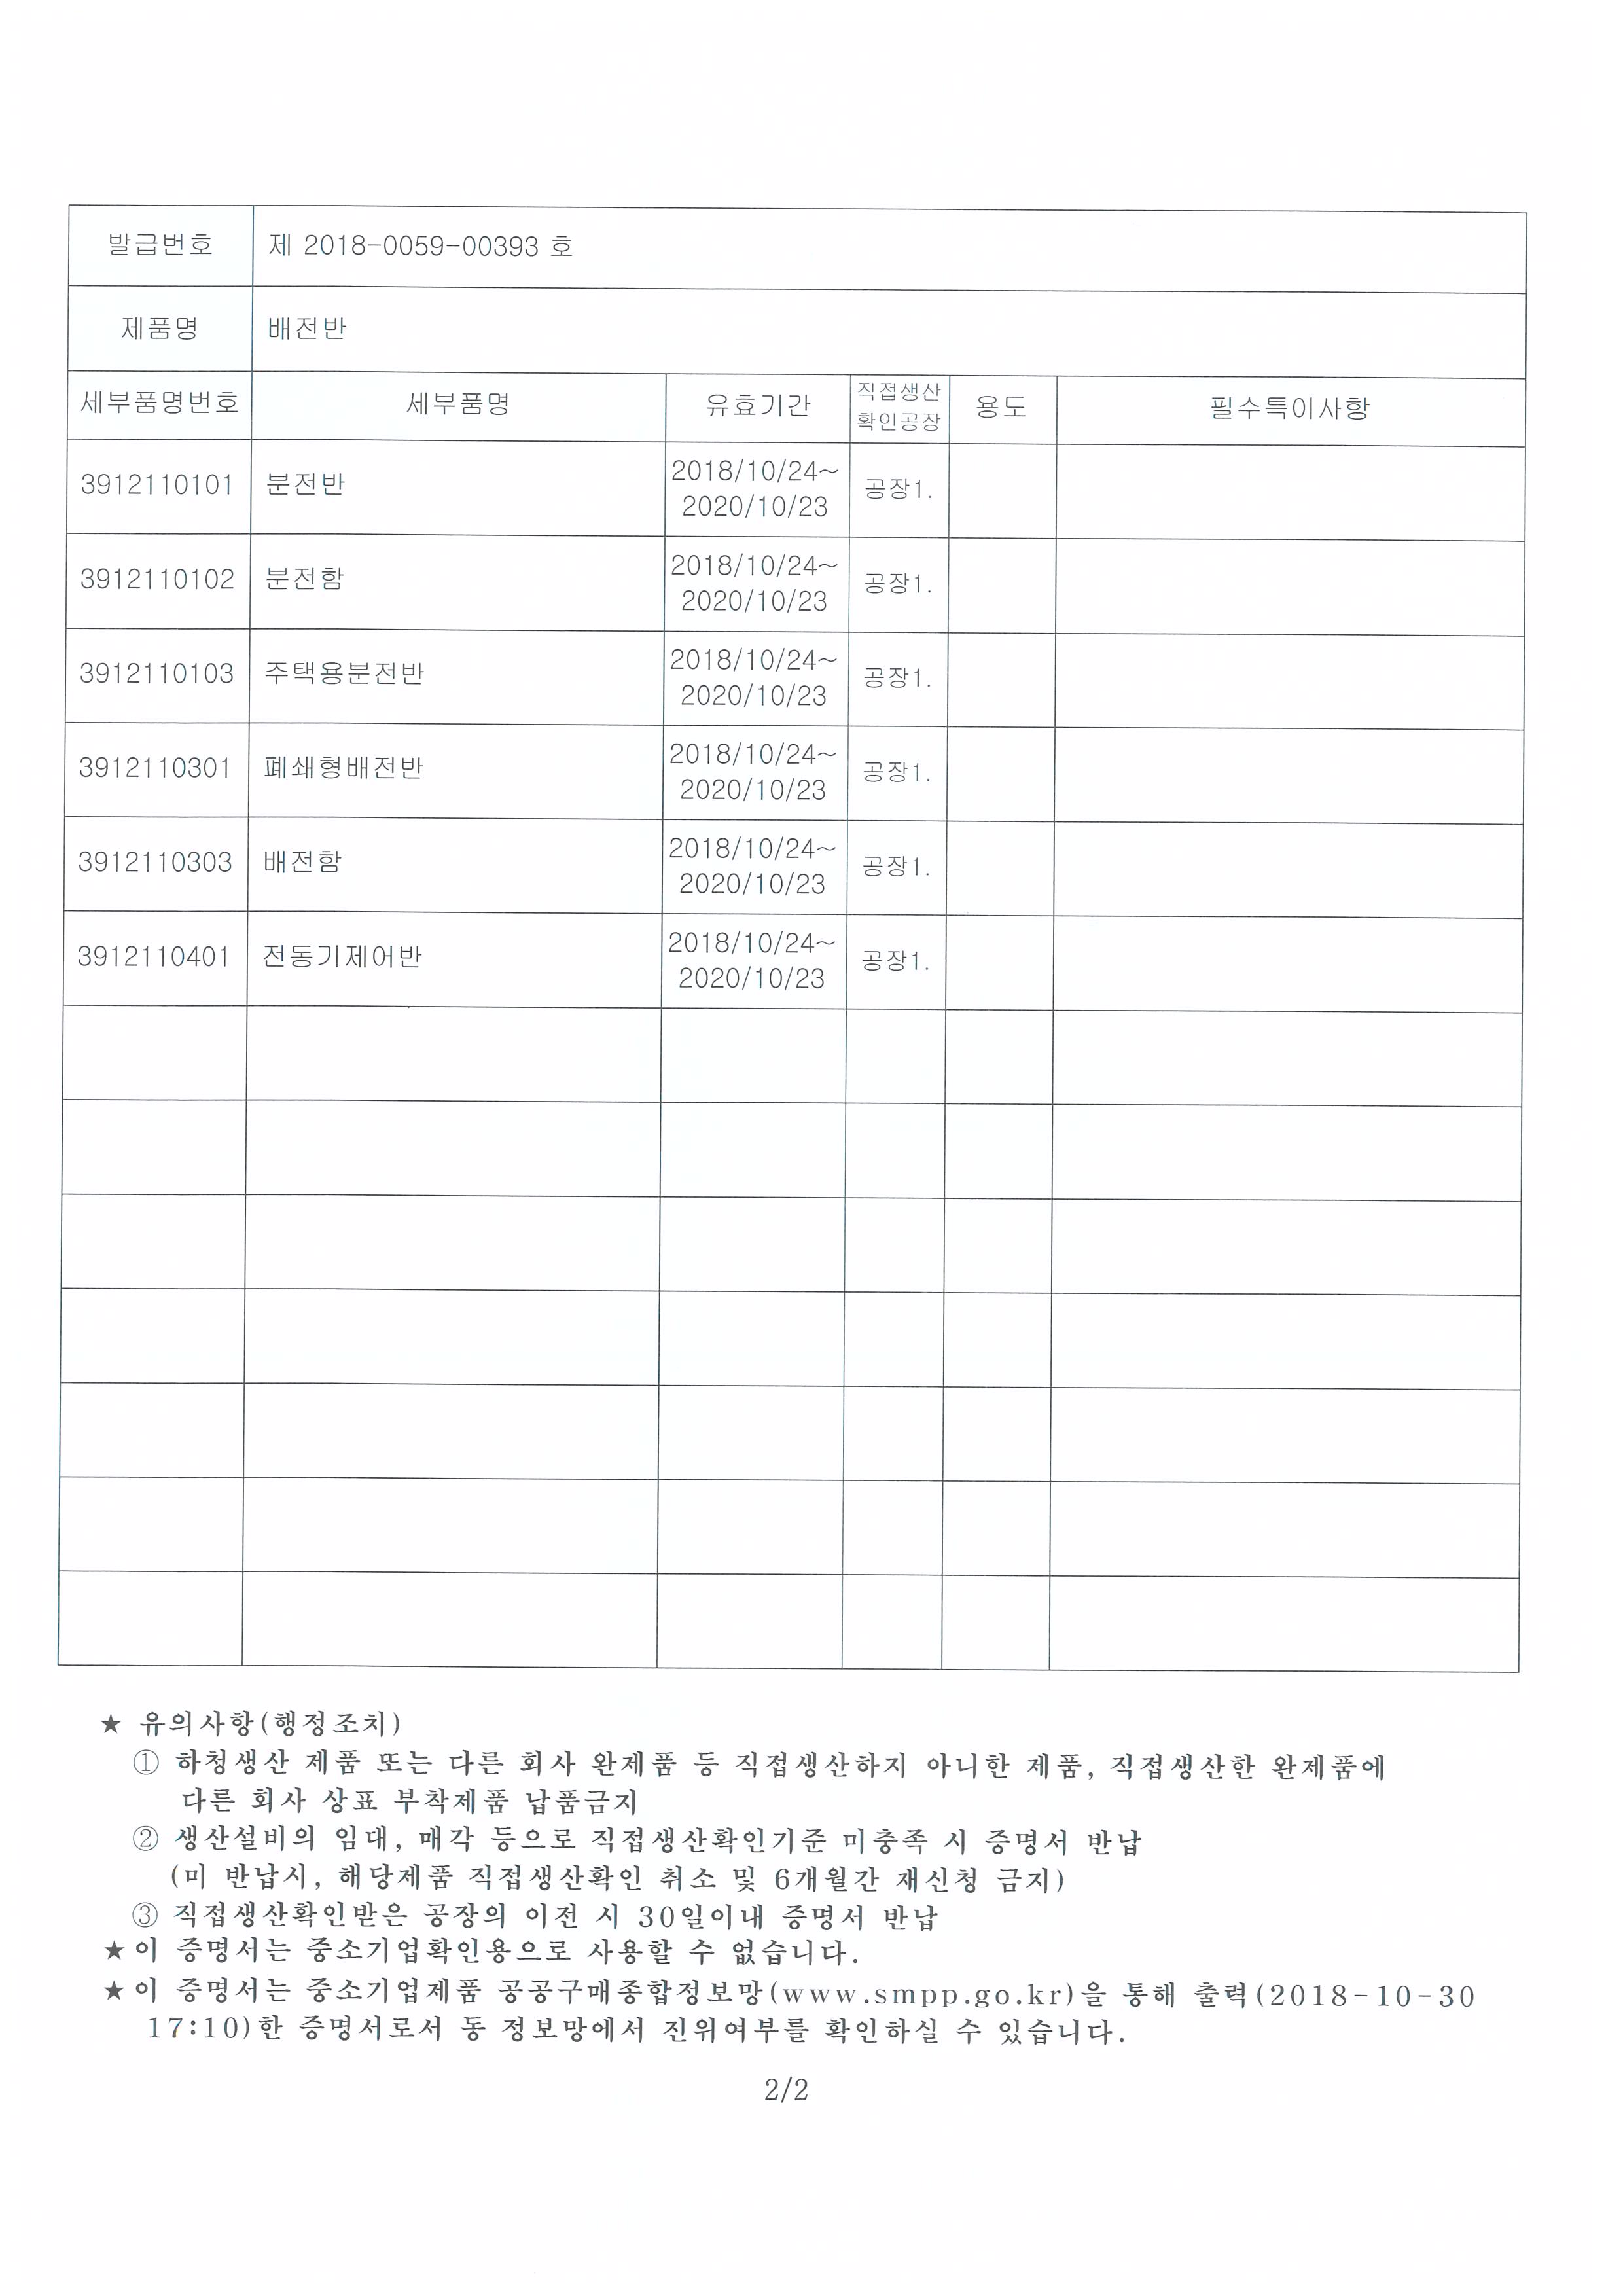 Direct production certificate2 [첨부 이미지1]